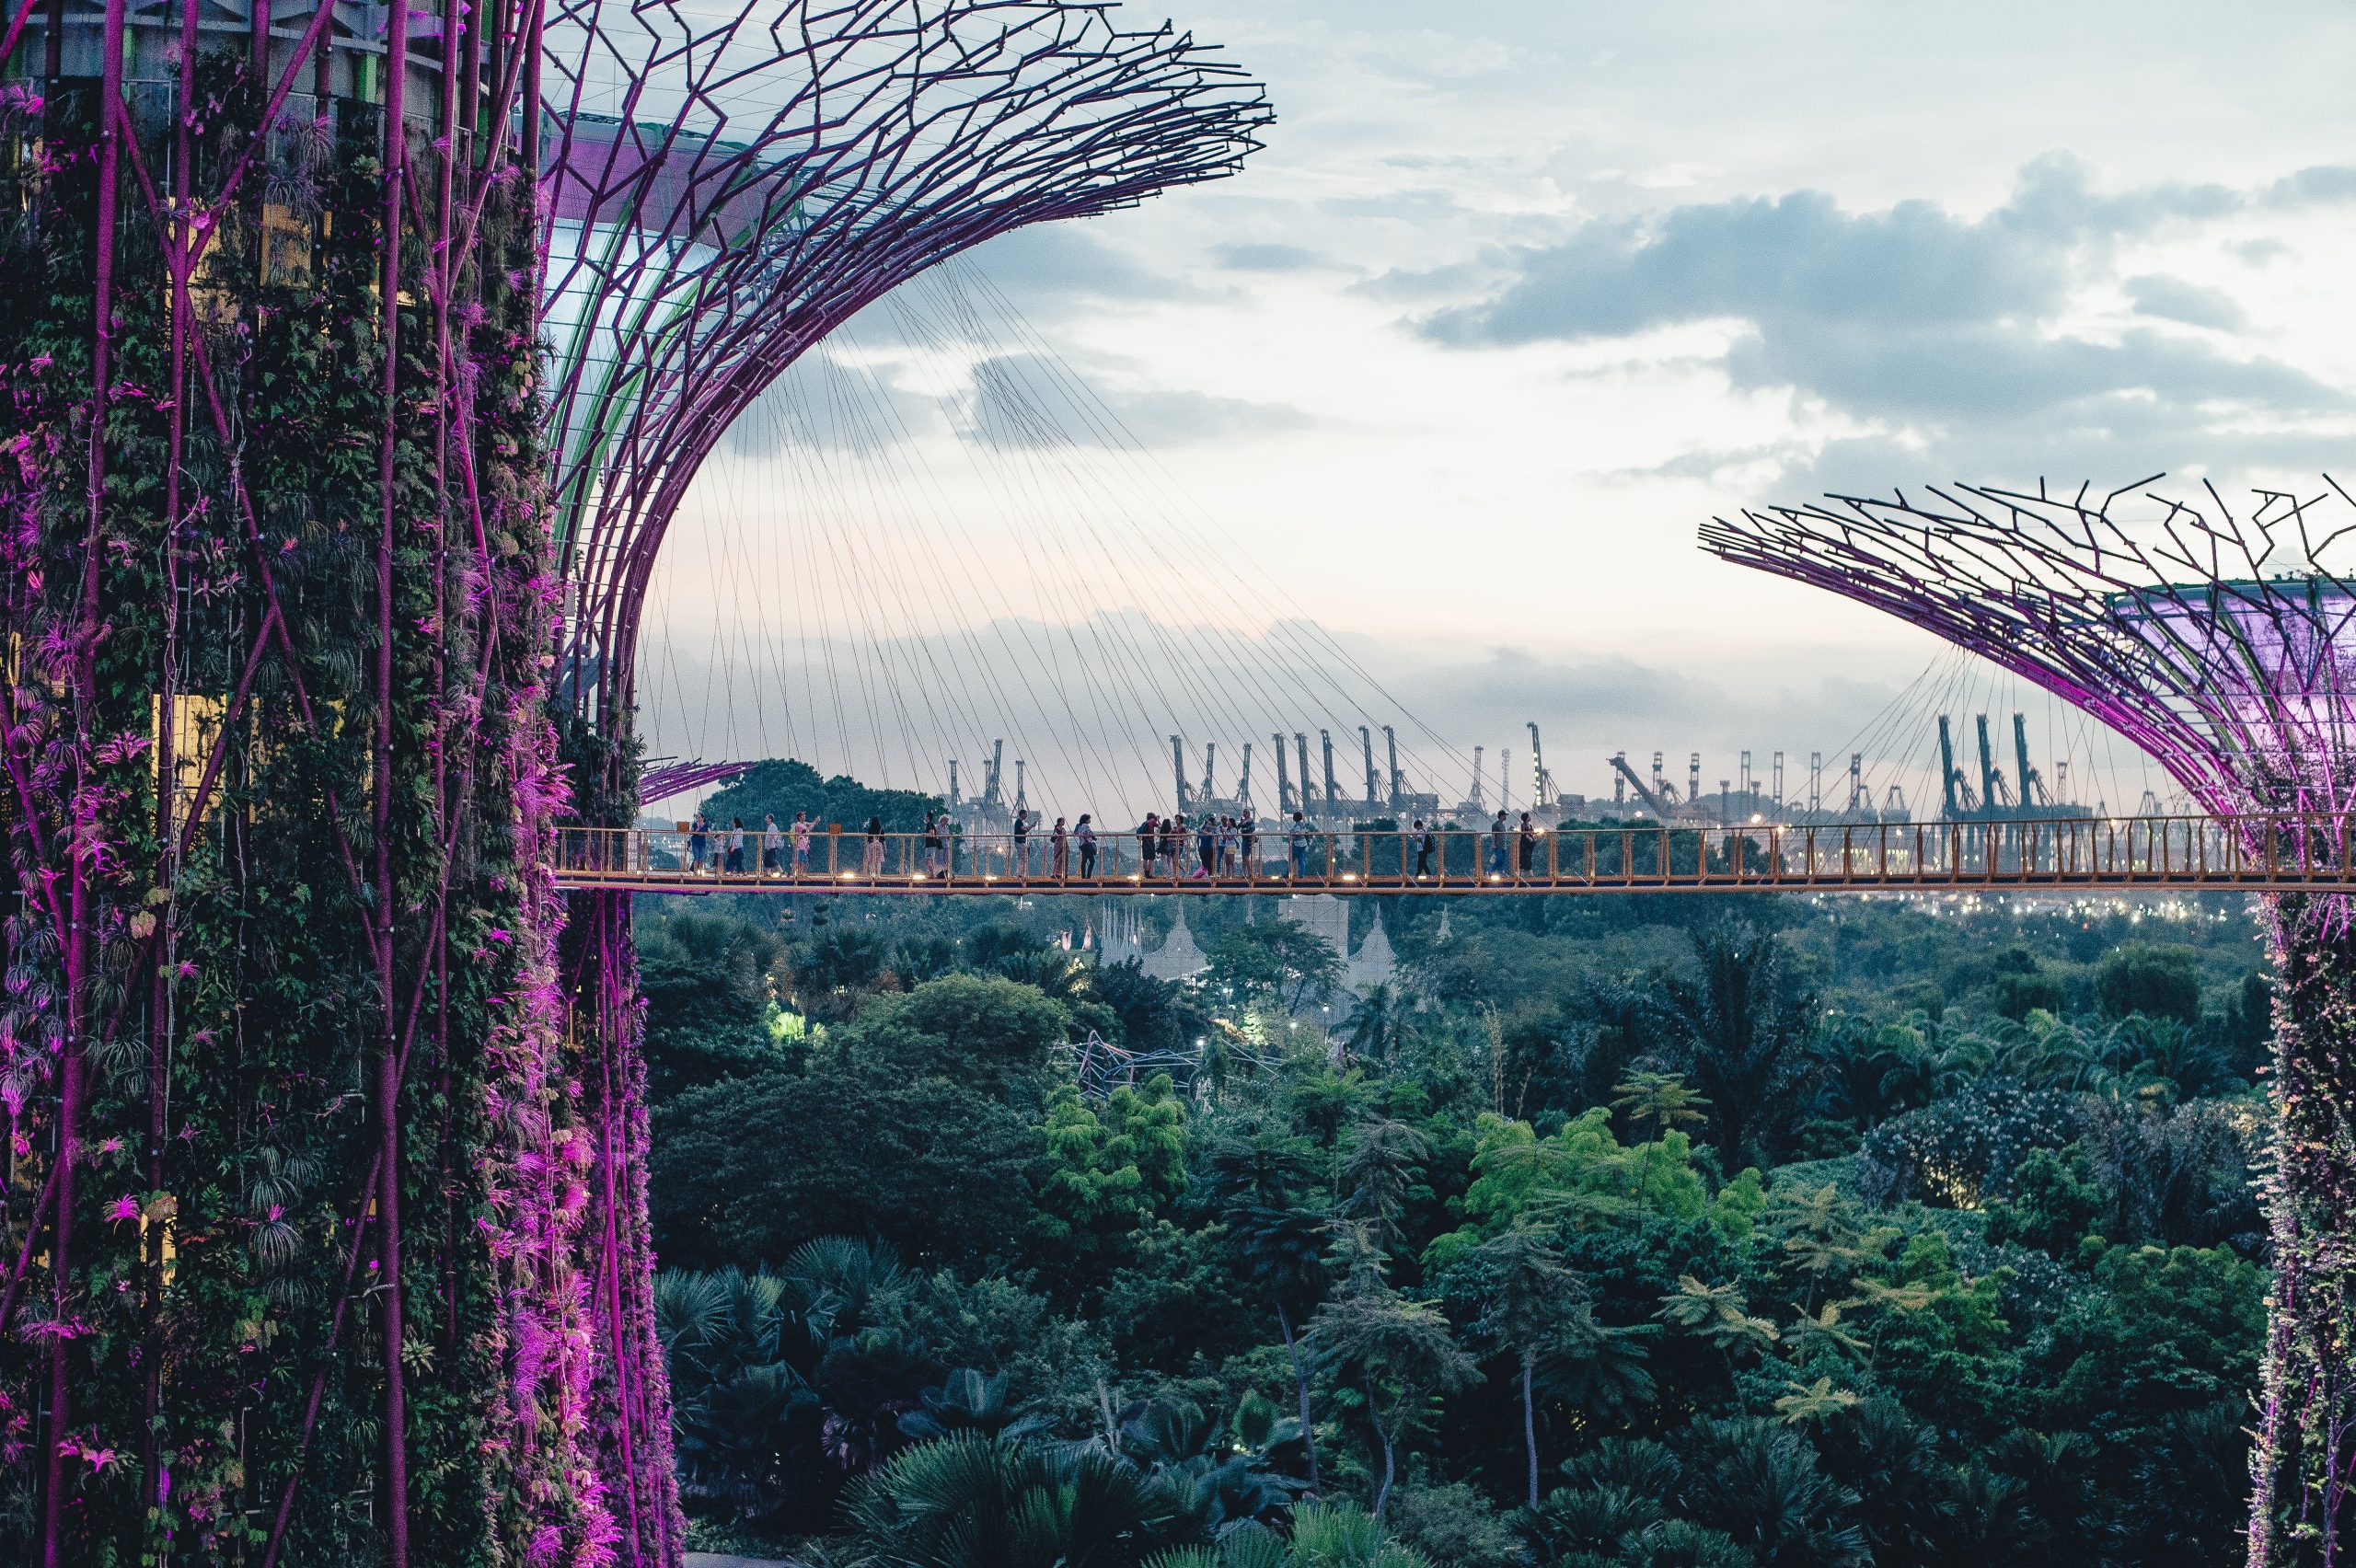 Tech and Innovation Hub: Visiting Singapore’s Futuristic Attractions